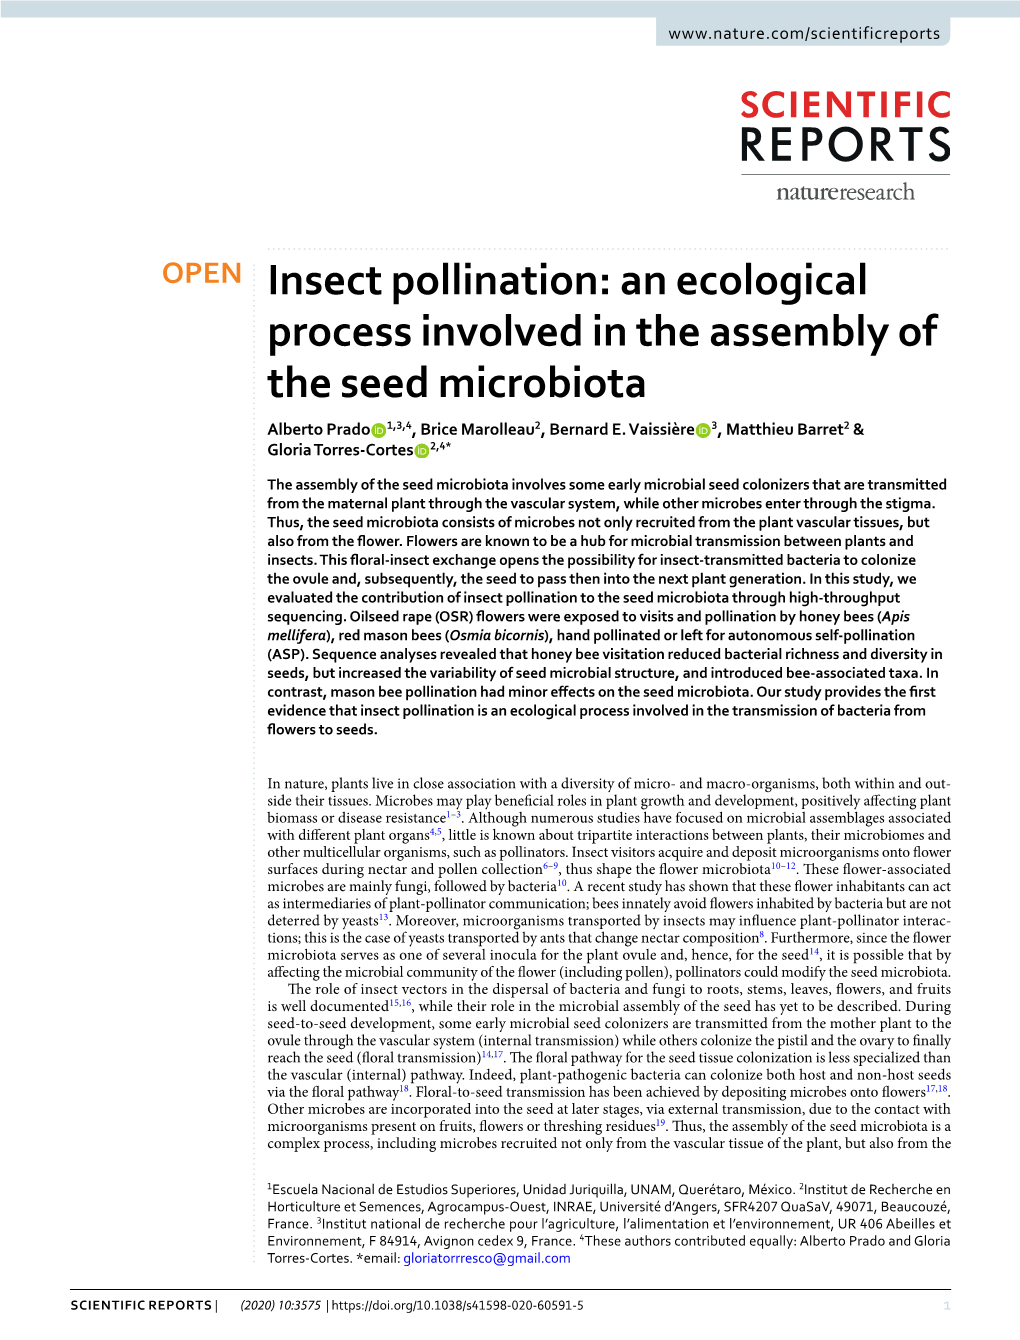 Insect Pollination: an Ecological Process Involved in the Assembly of the Seed Microbiota Alberto Prado 1,3,4, Brice Marolleau2, Bernard E